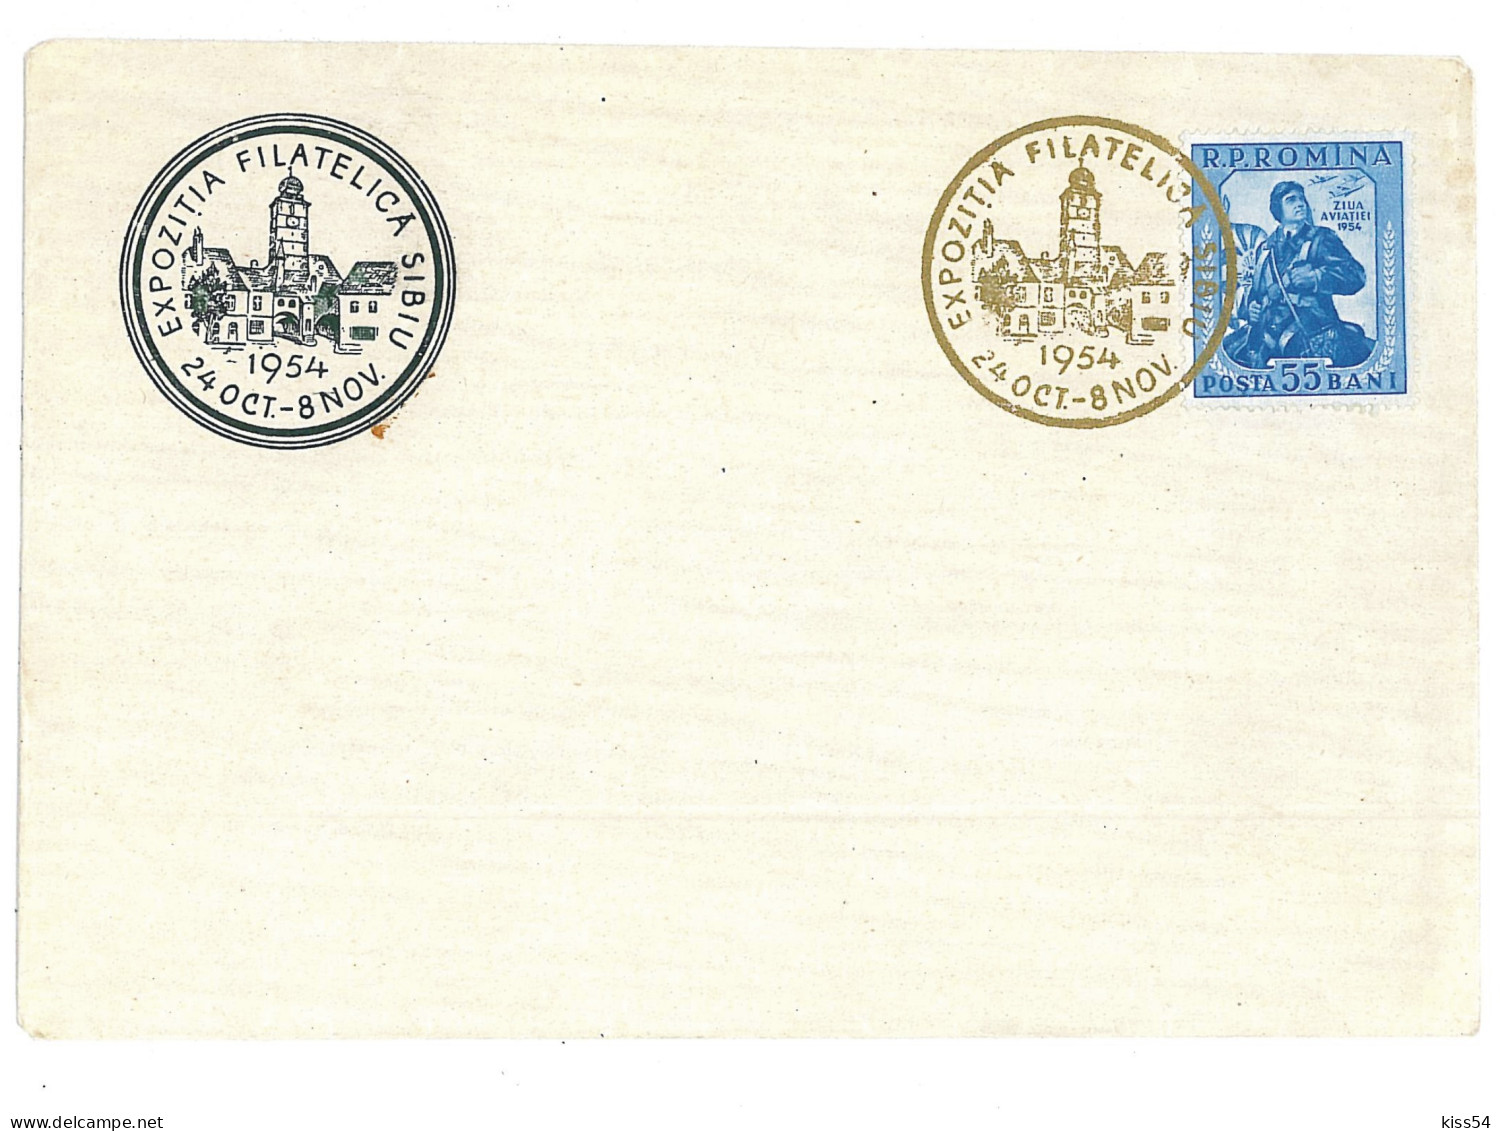 CIP 13 - 202 SIBIU, Exibition Philatelic Cover - Used - 1954 - Covers & Documents